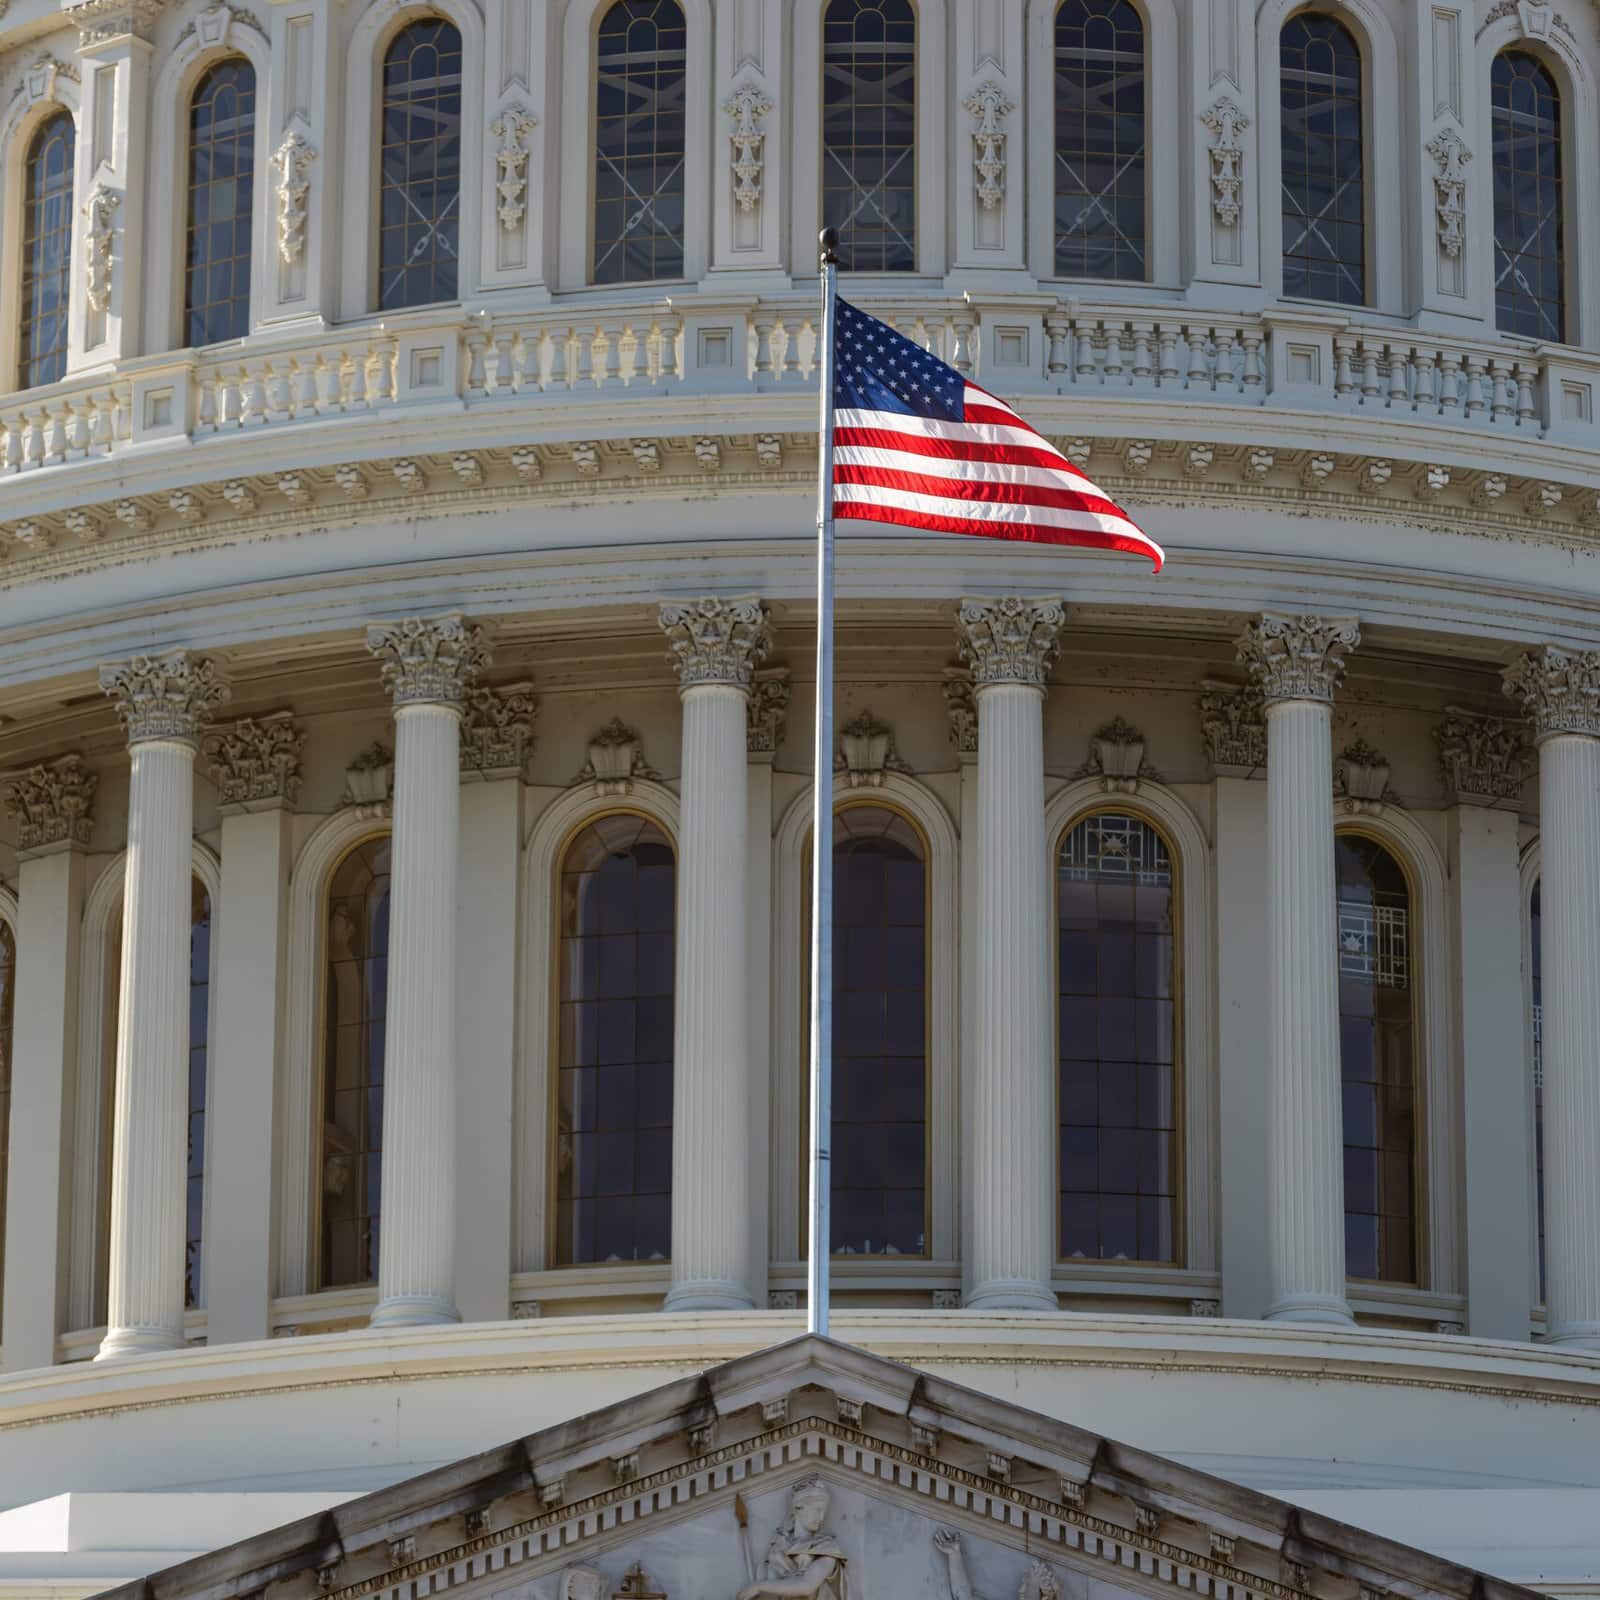 American flag on the background of the Capitol in Washington D.C.